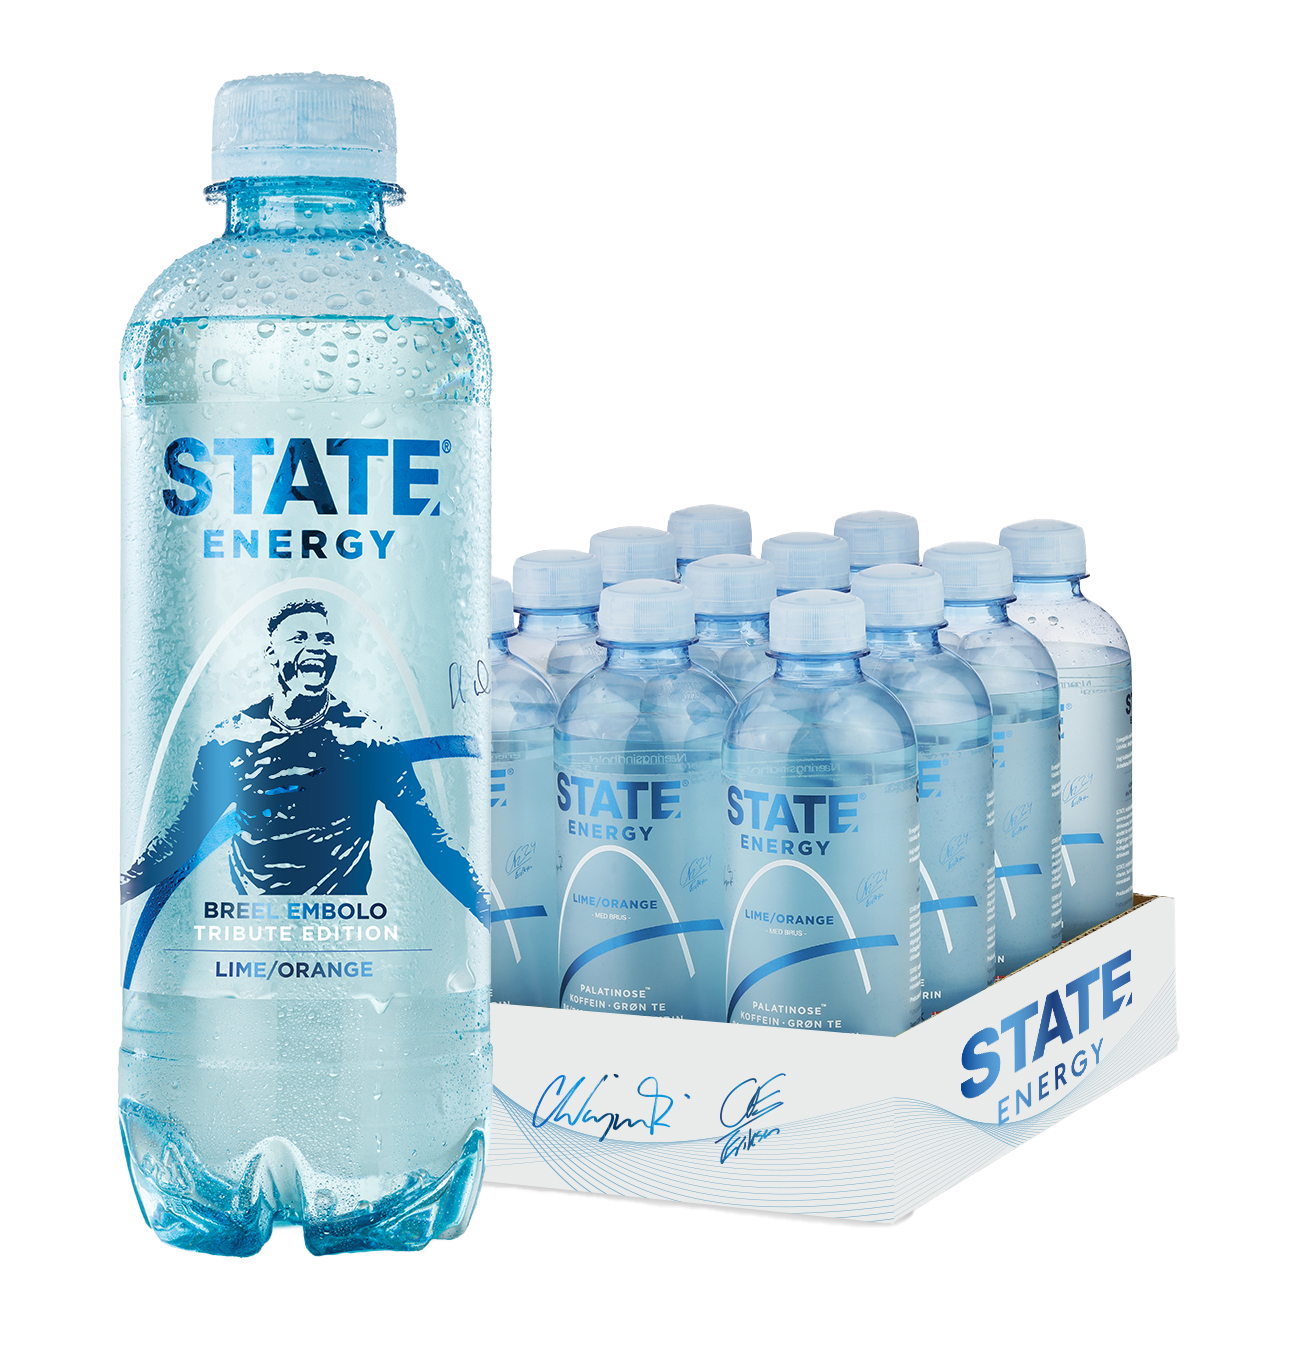 STATE ENERGY - Breel Embolo Edition (12x400ml)